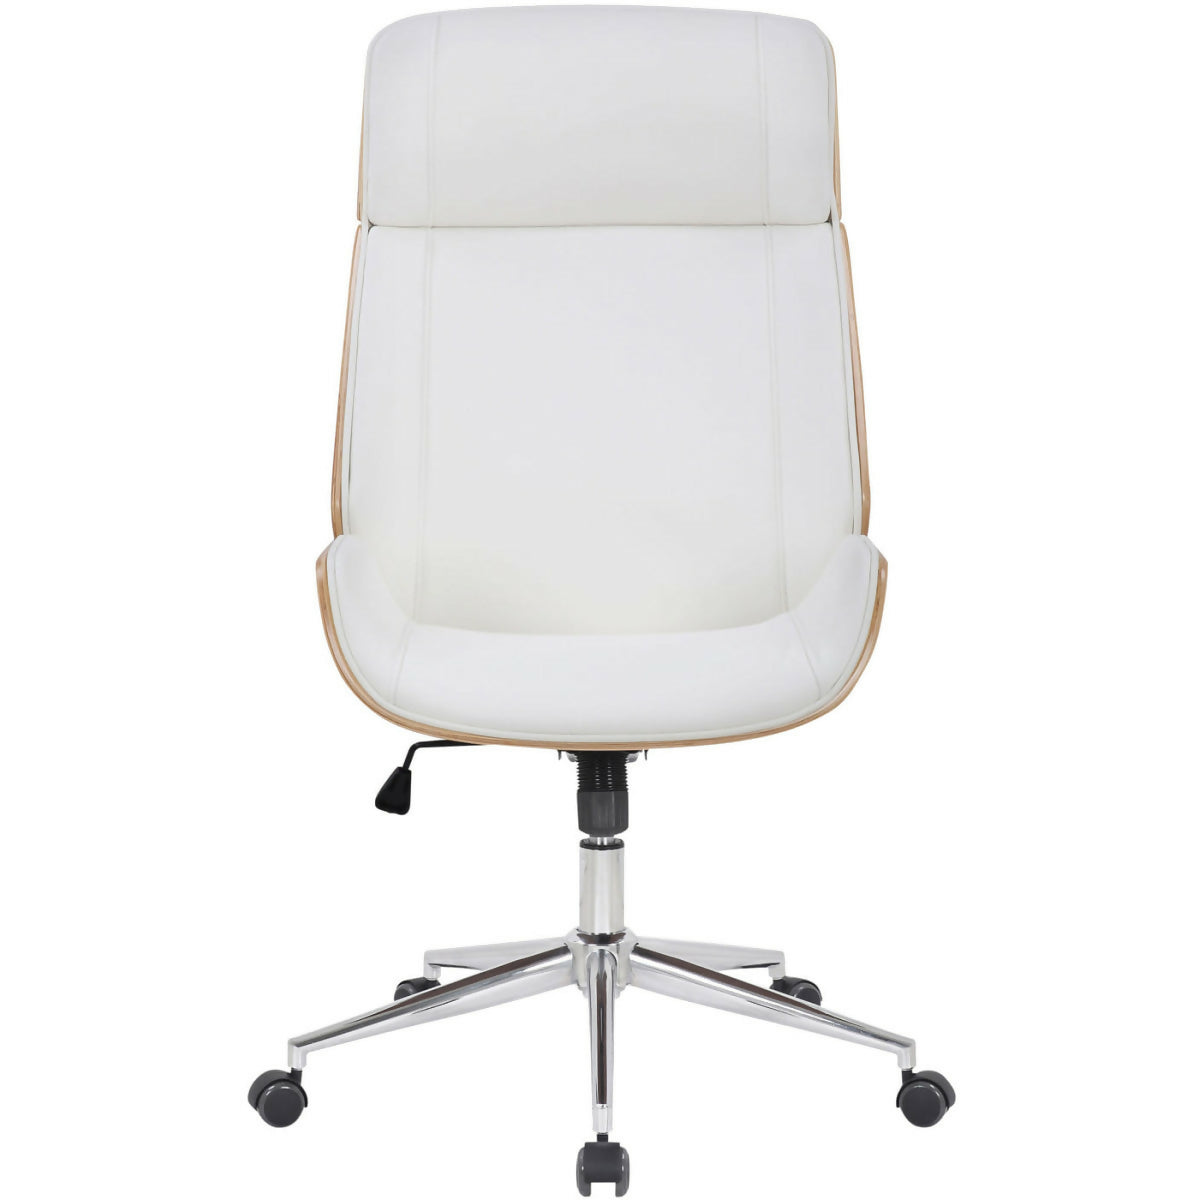 Varel office armchair - Natural wood - white - 0